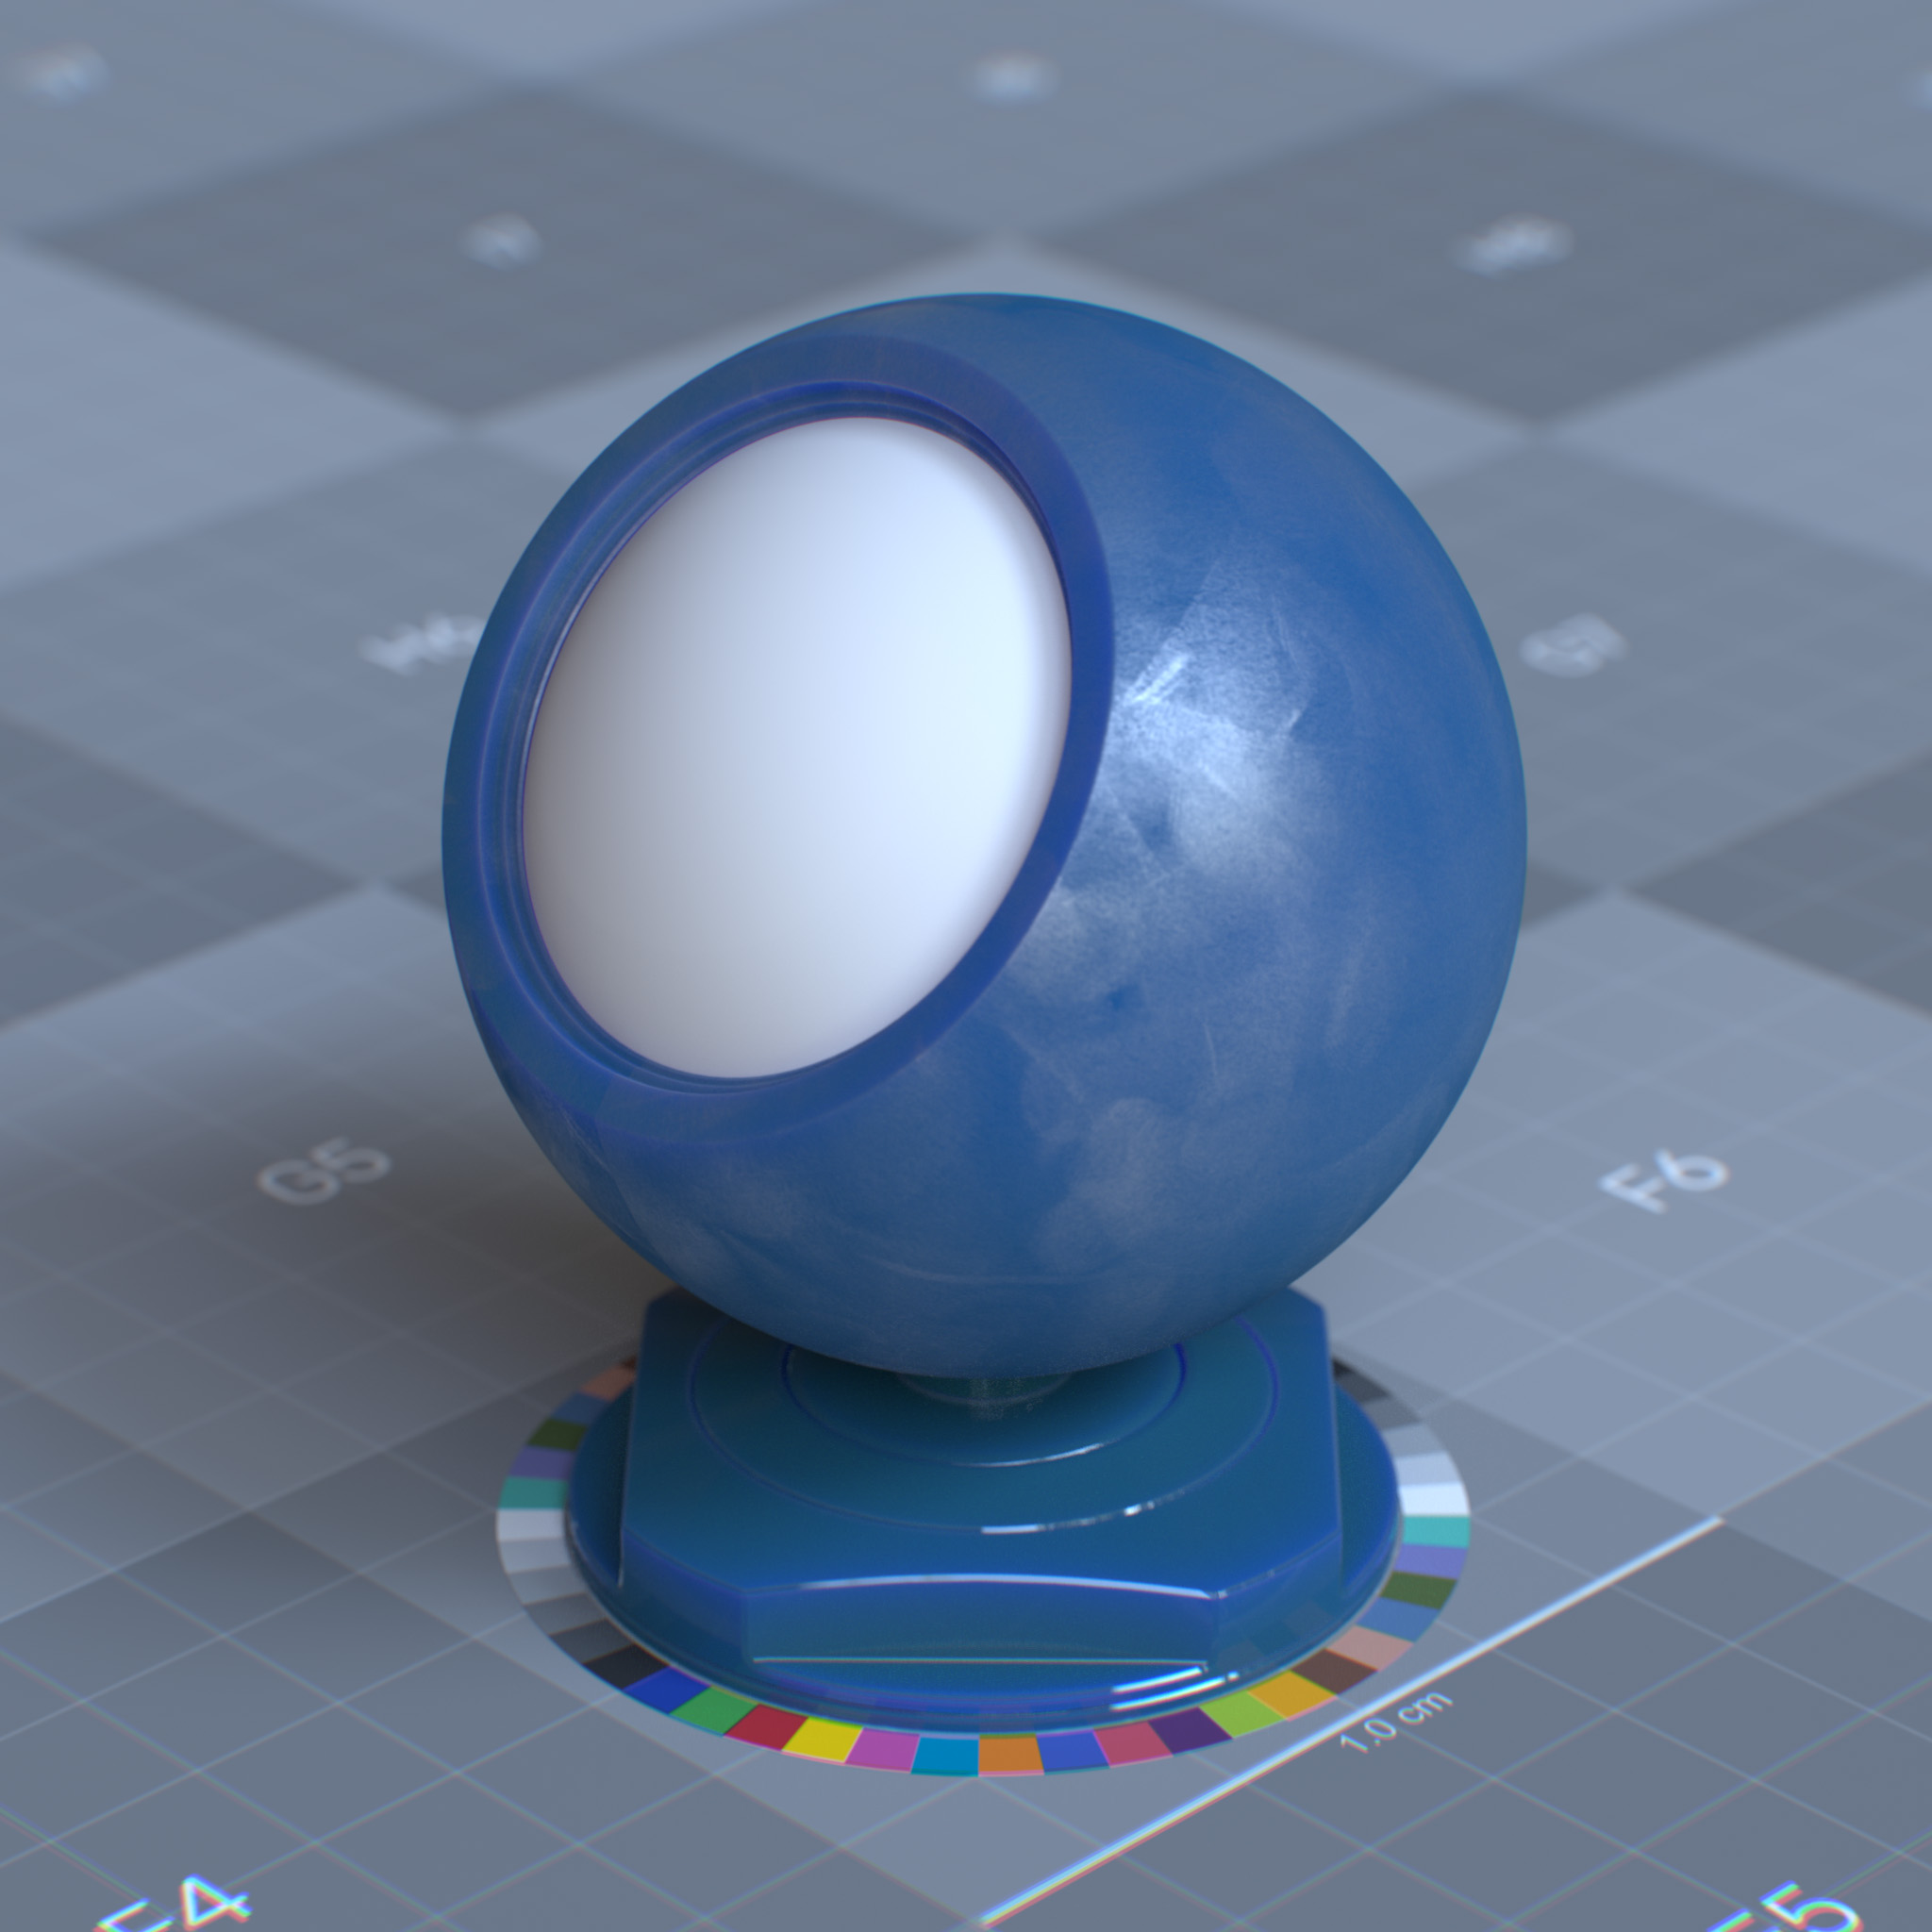 rtx_material_omnisurfacebase_specular_reflection_weight_1p0